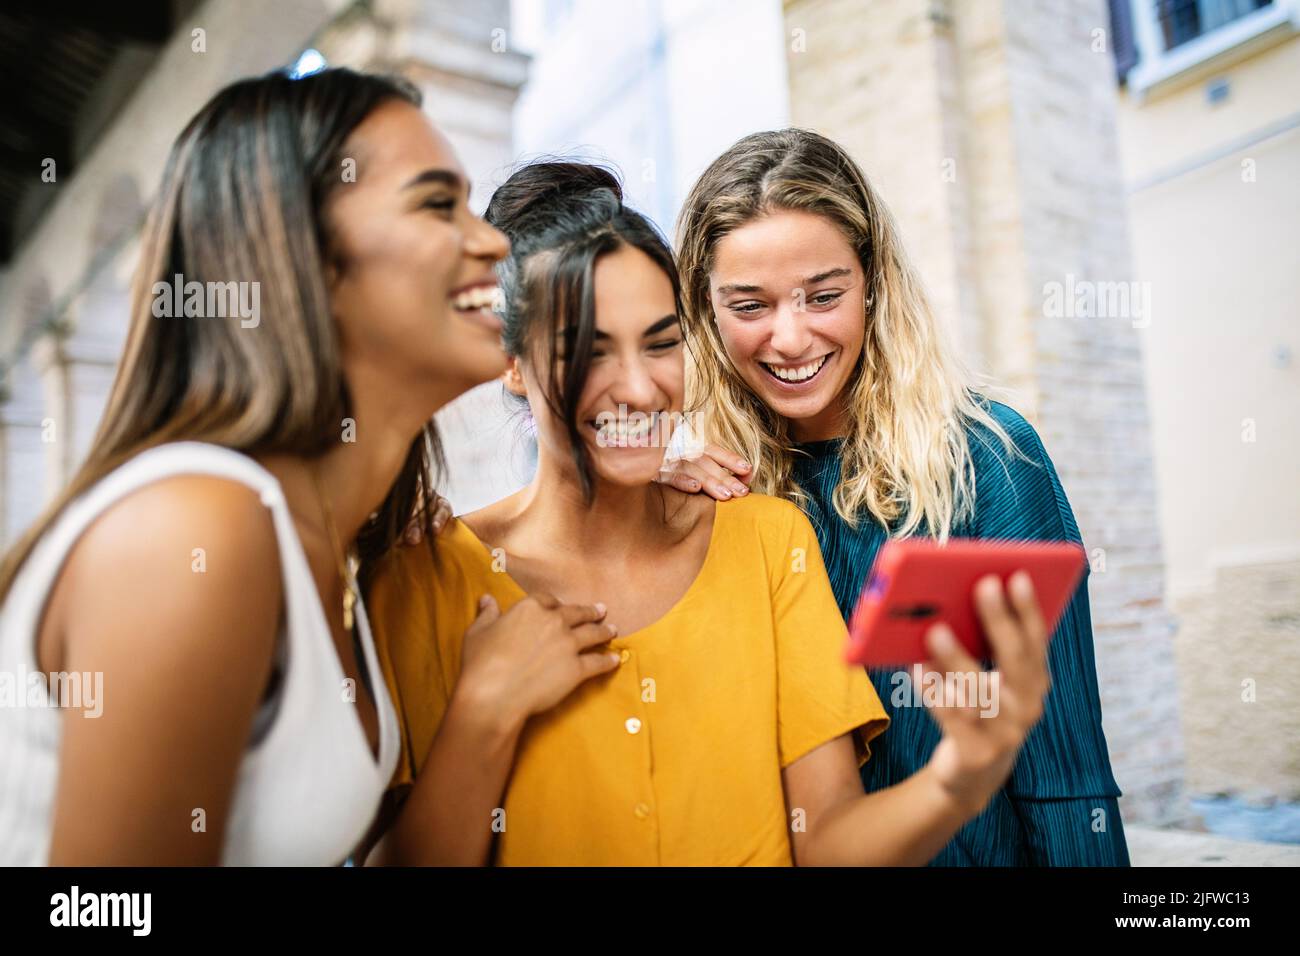 Happy young women having fun together watching funny media content on phone Stock Photo